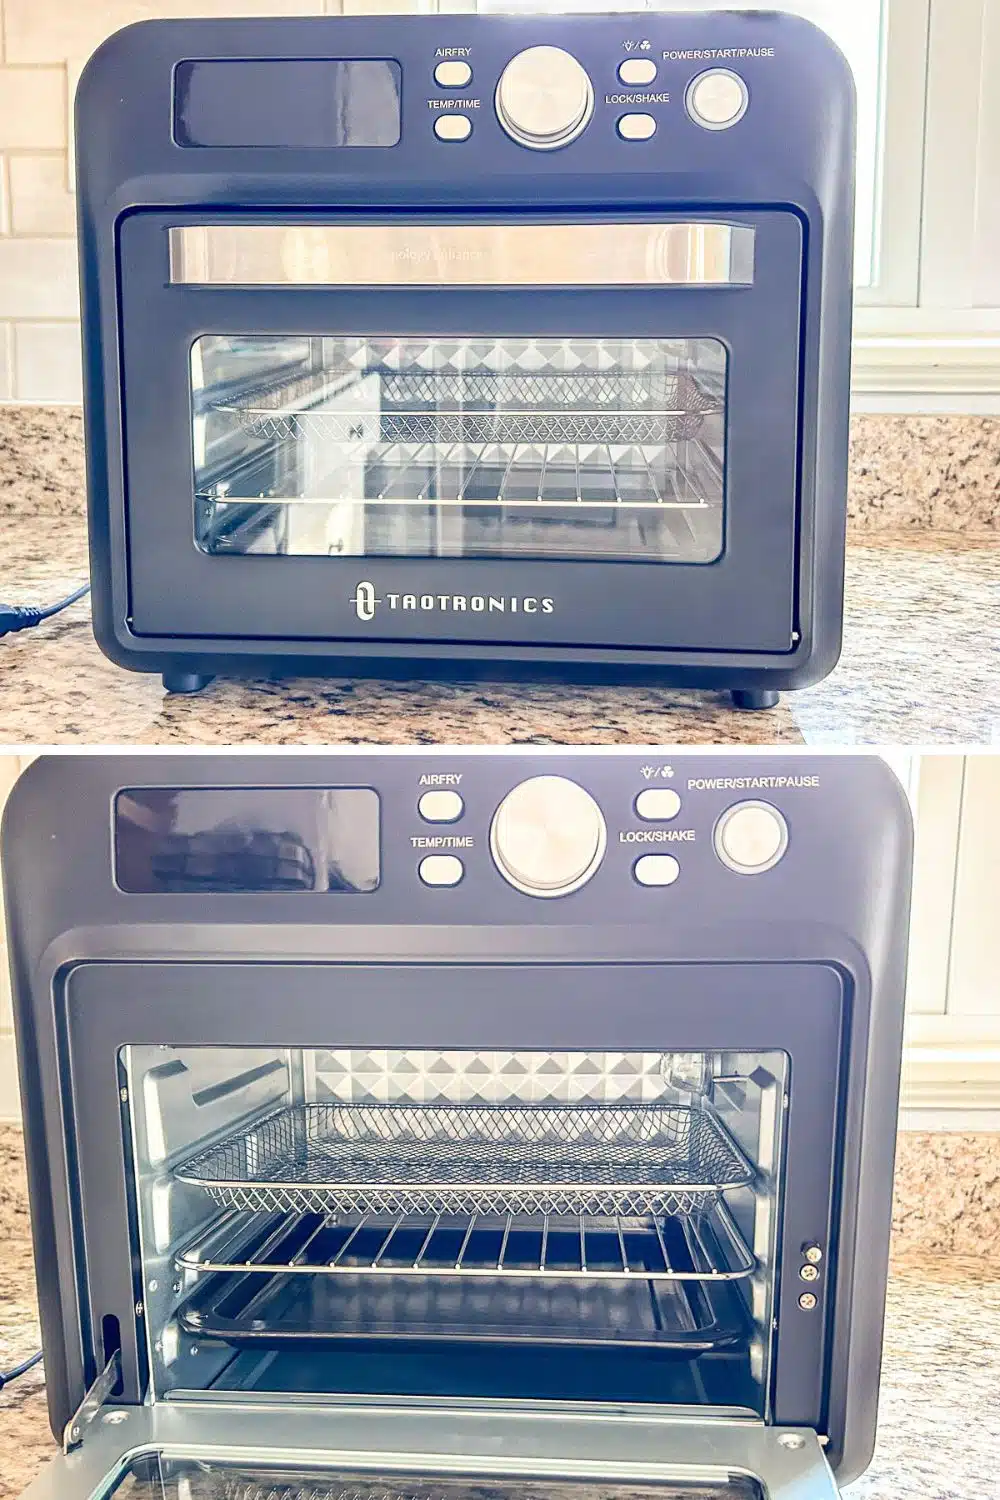 Two photos, one of the air fryer with the door closed and the second with the door open with all the trays